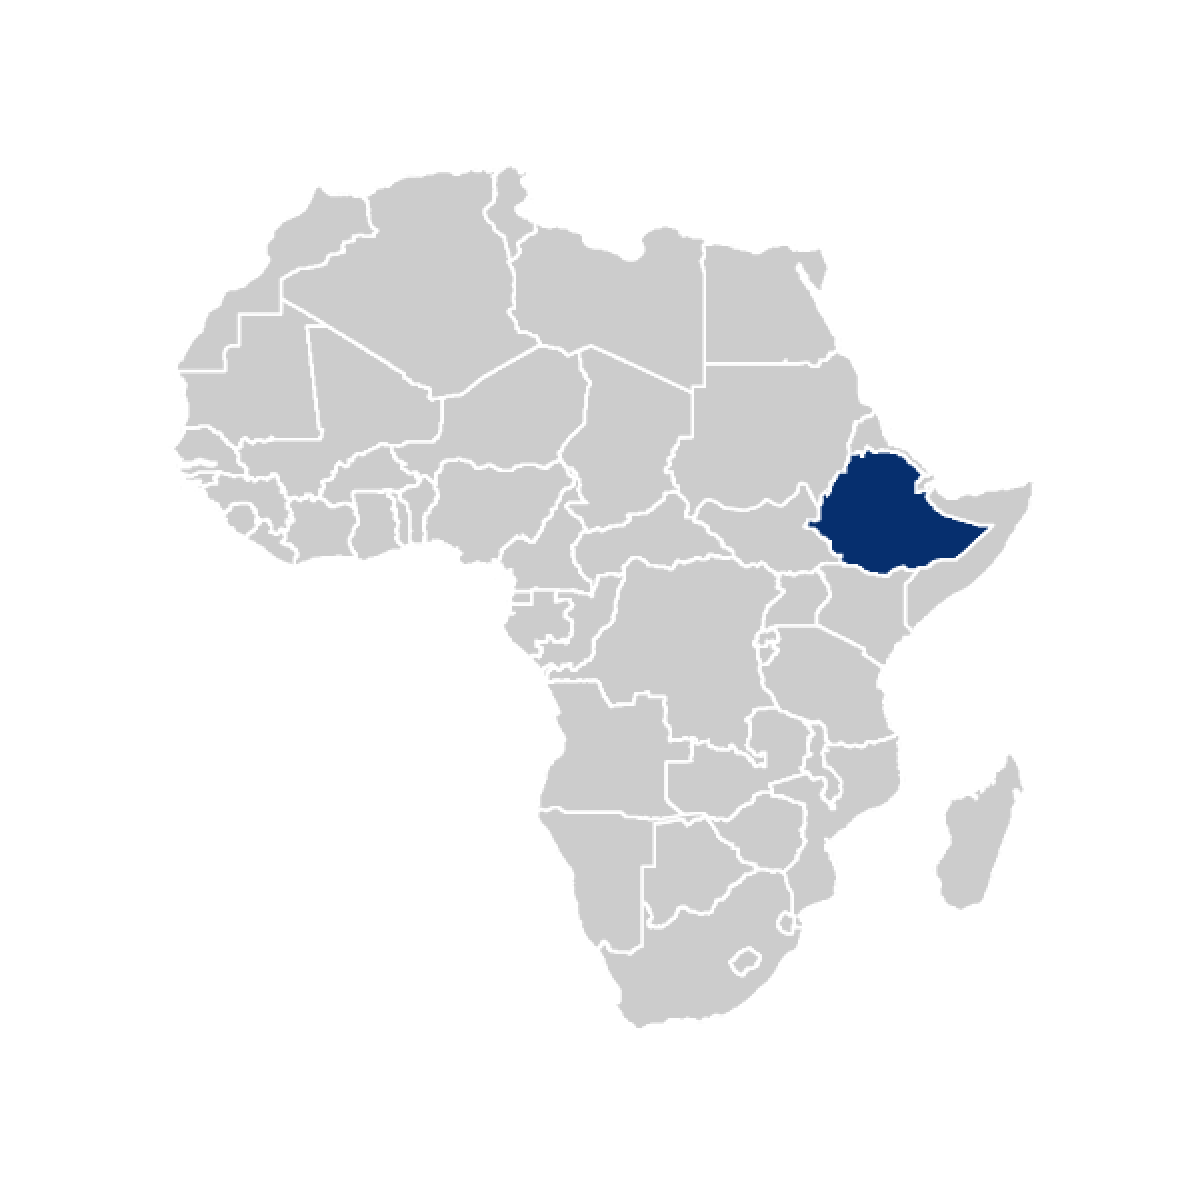 Ethiopia highlighted in map of Africa